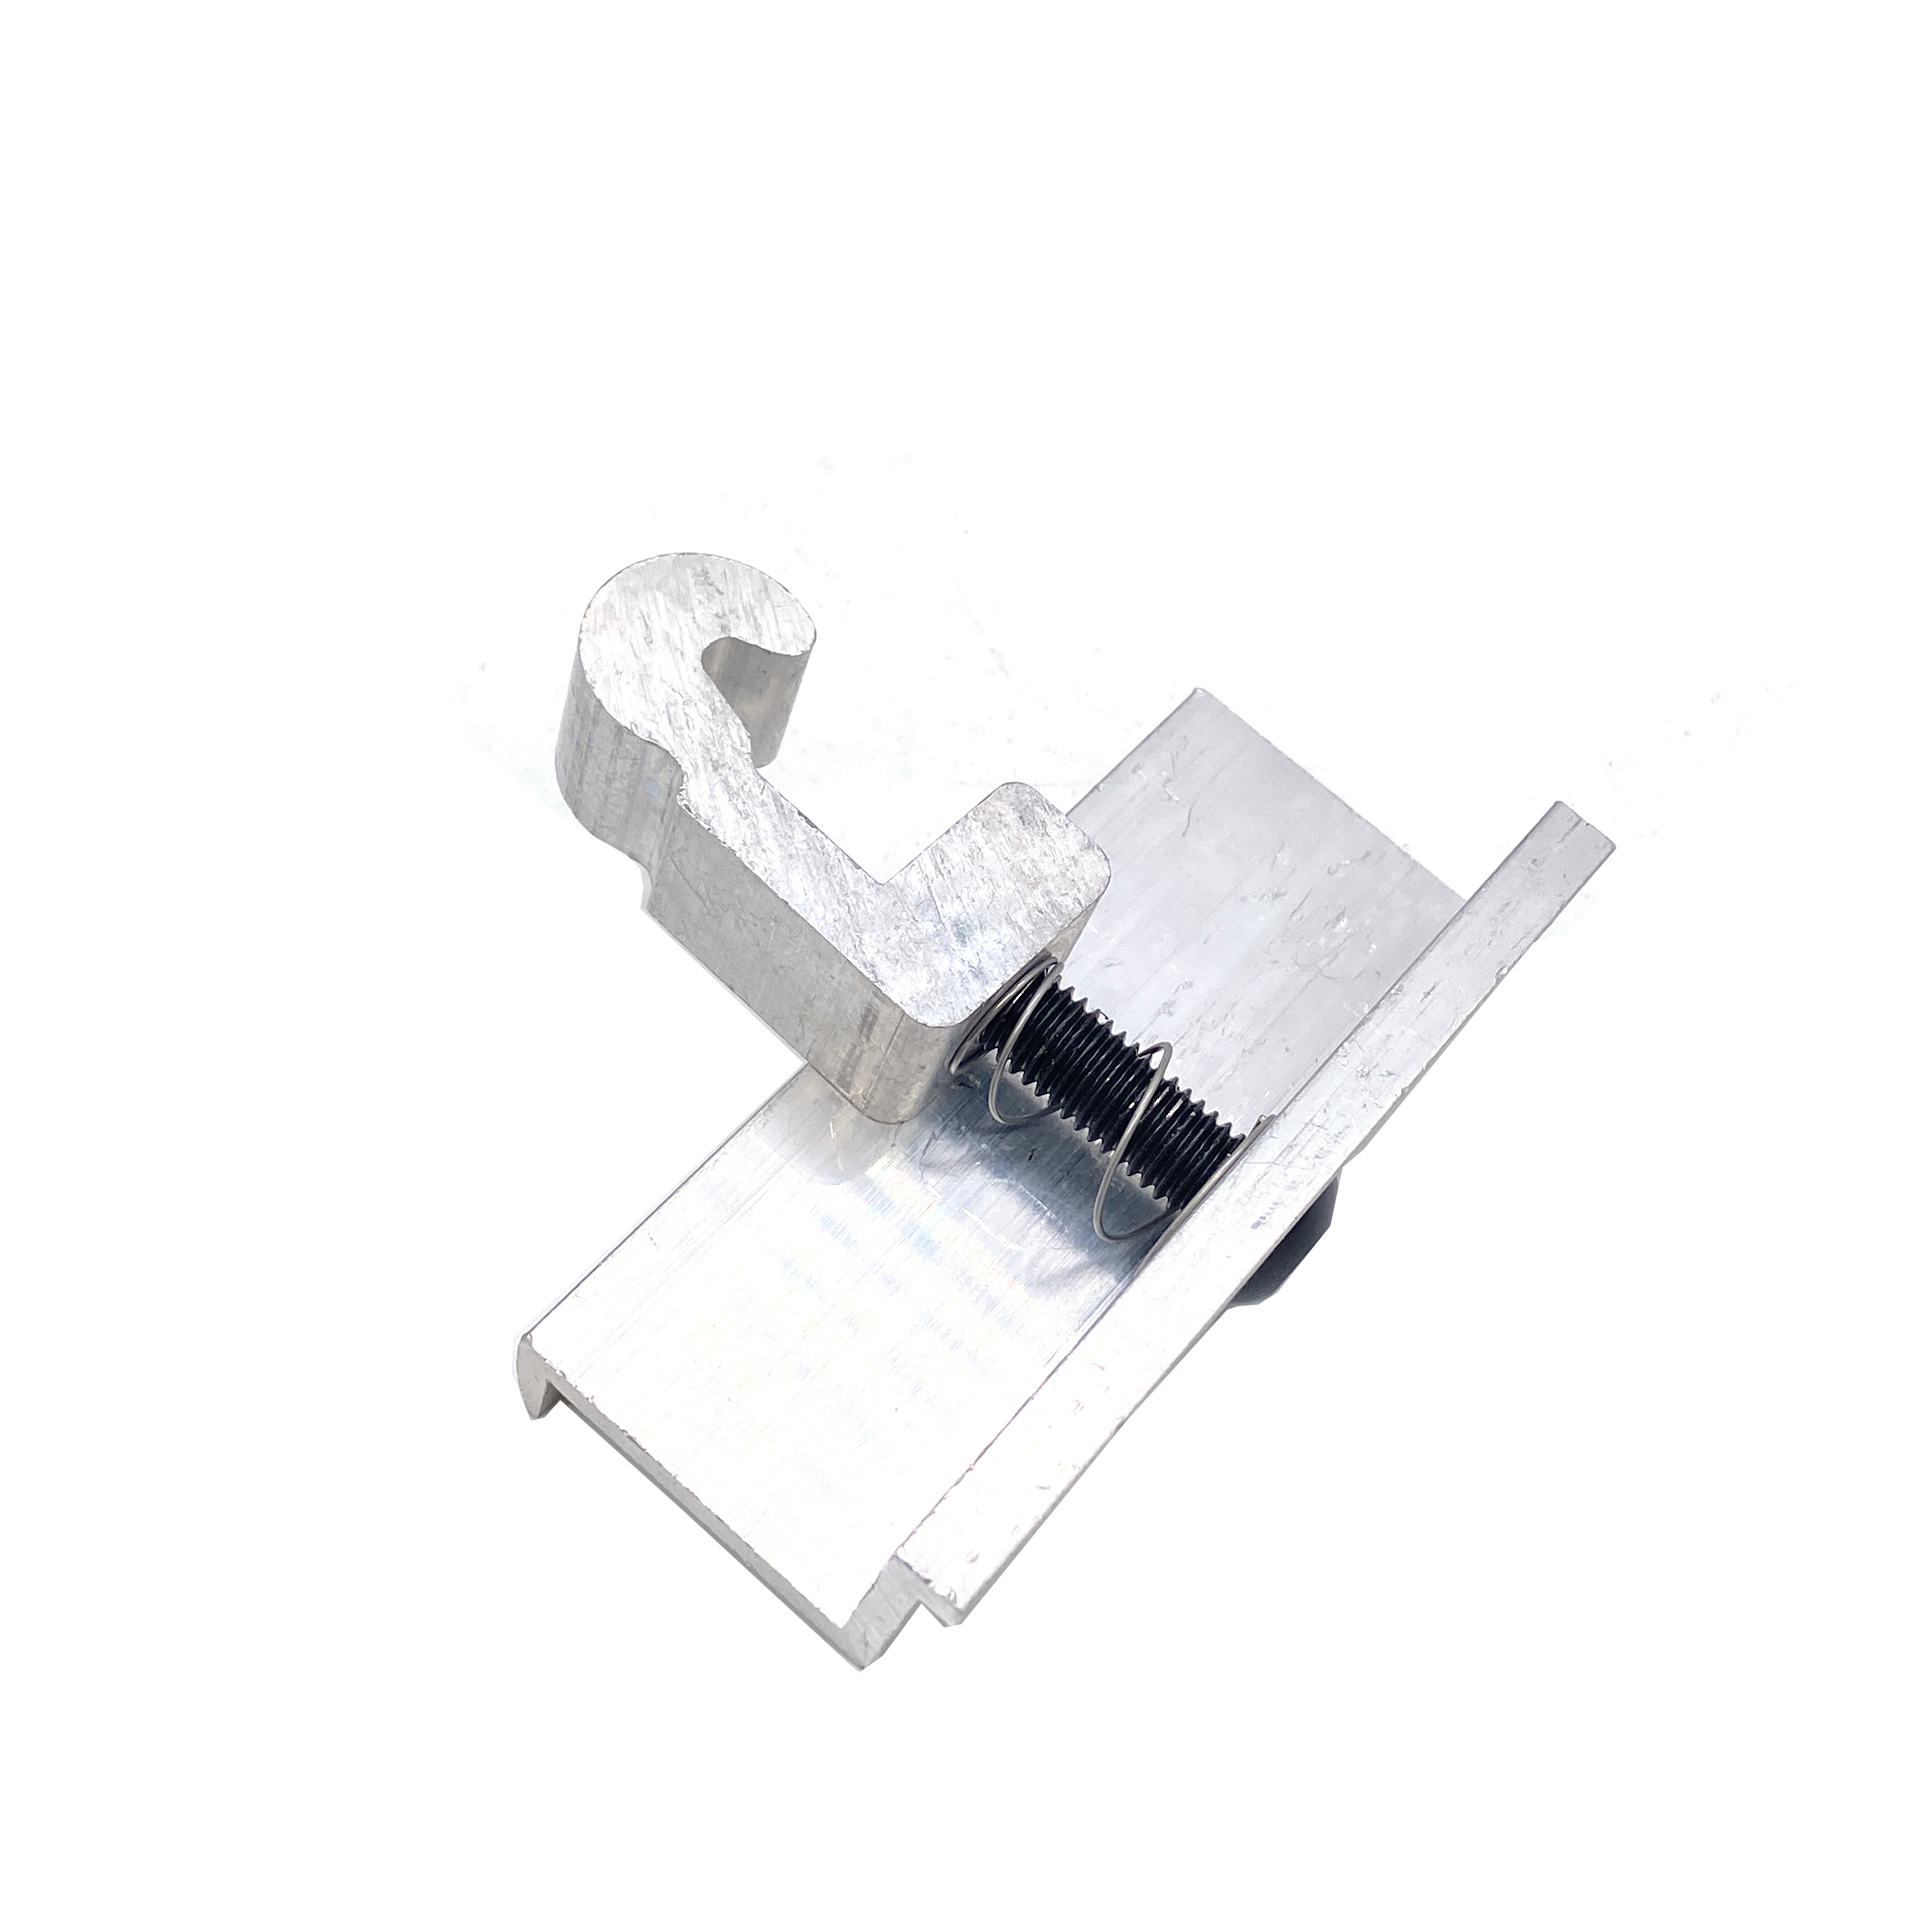 Aluminum MID & End Clamp for Ground Or Flat Rooftop Solar Support Bracket for Solar Panel